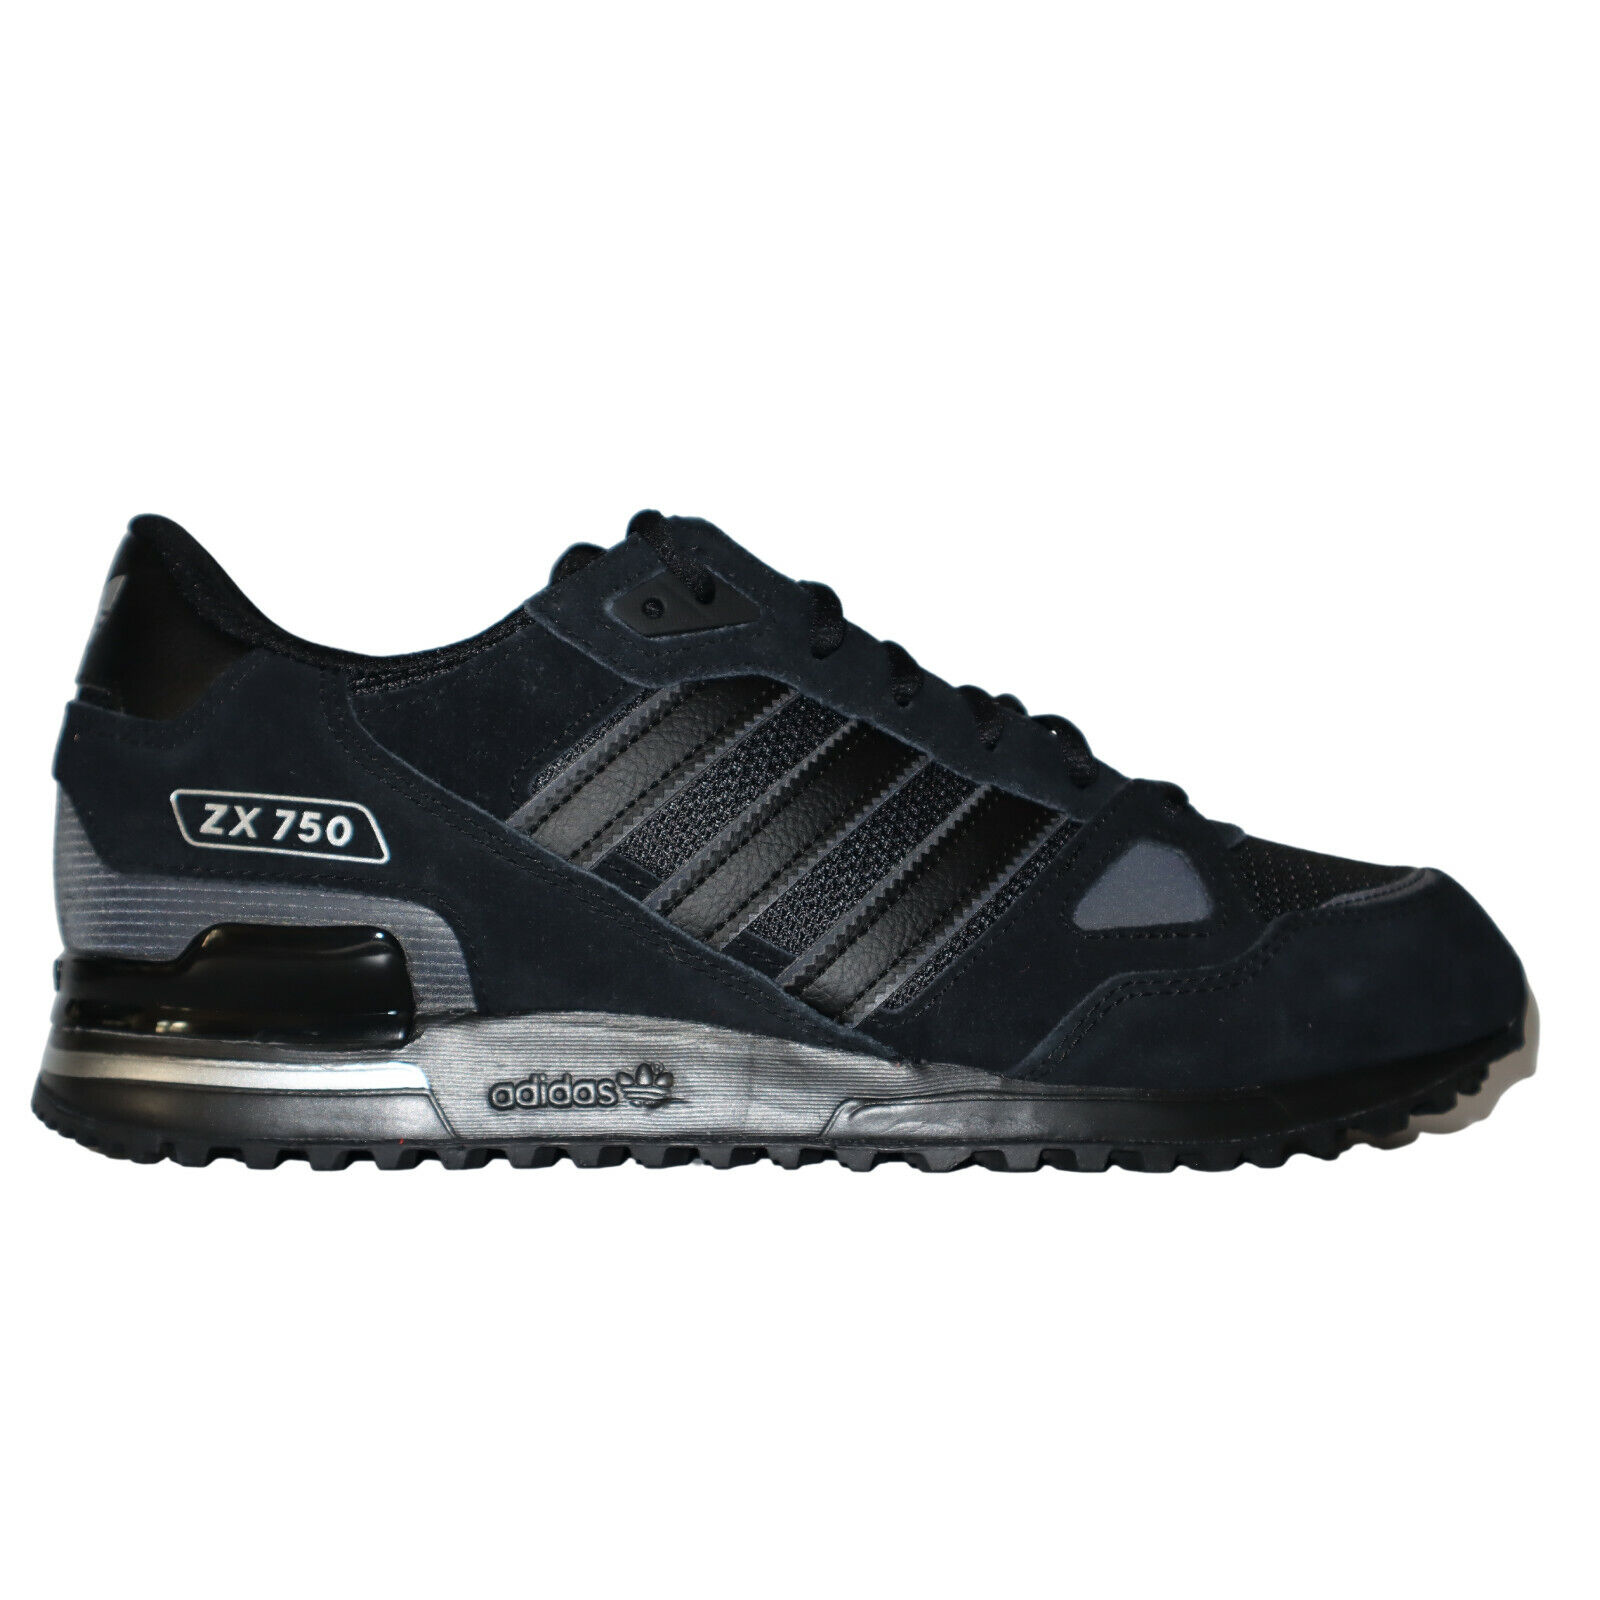 adidas Originals Mens ZX 750 Trainers in Black and Silver